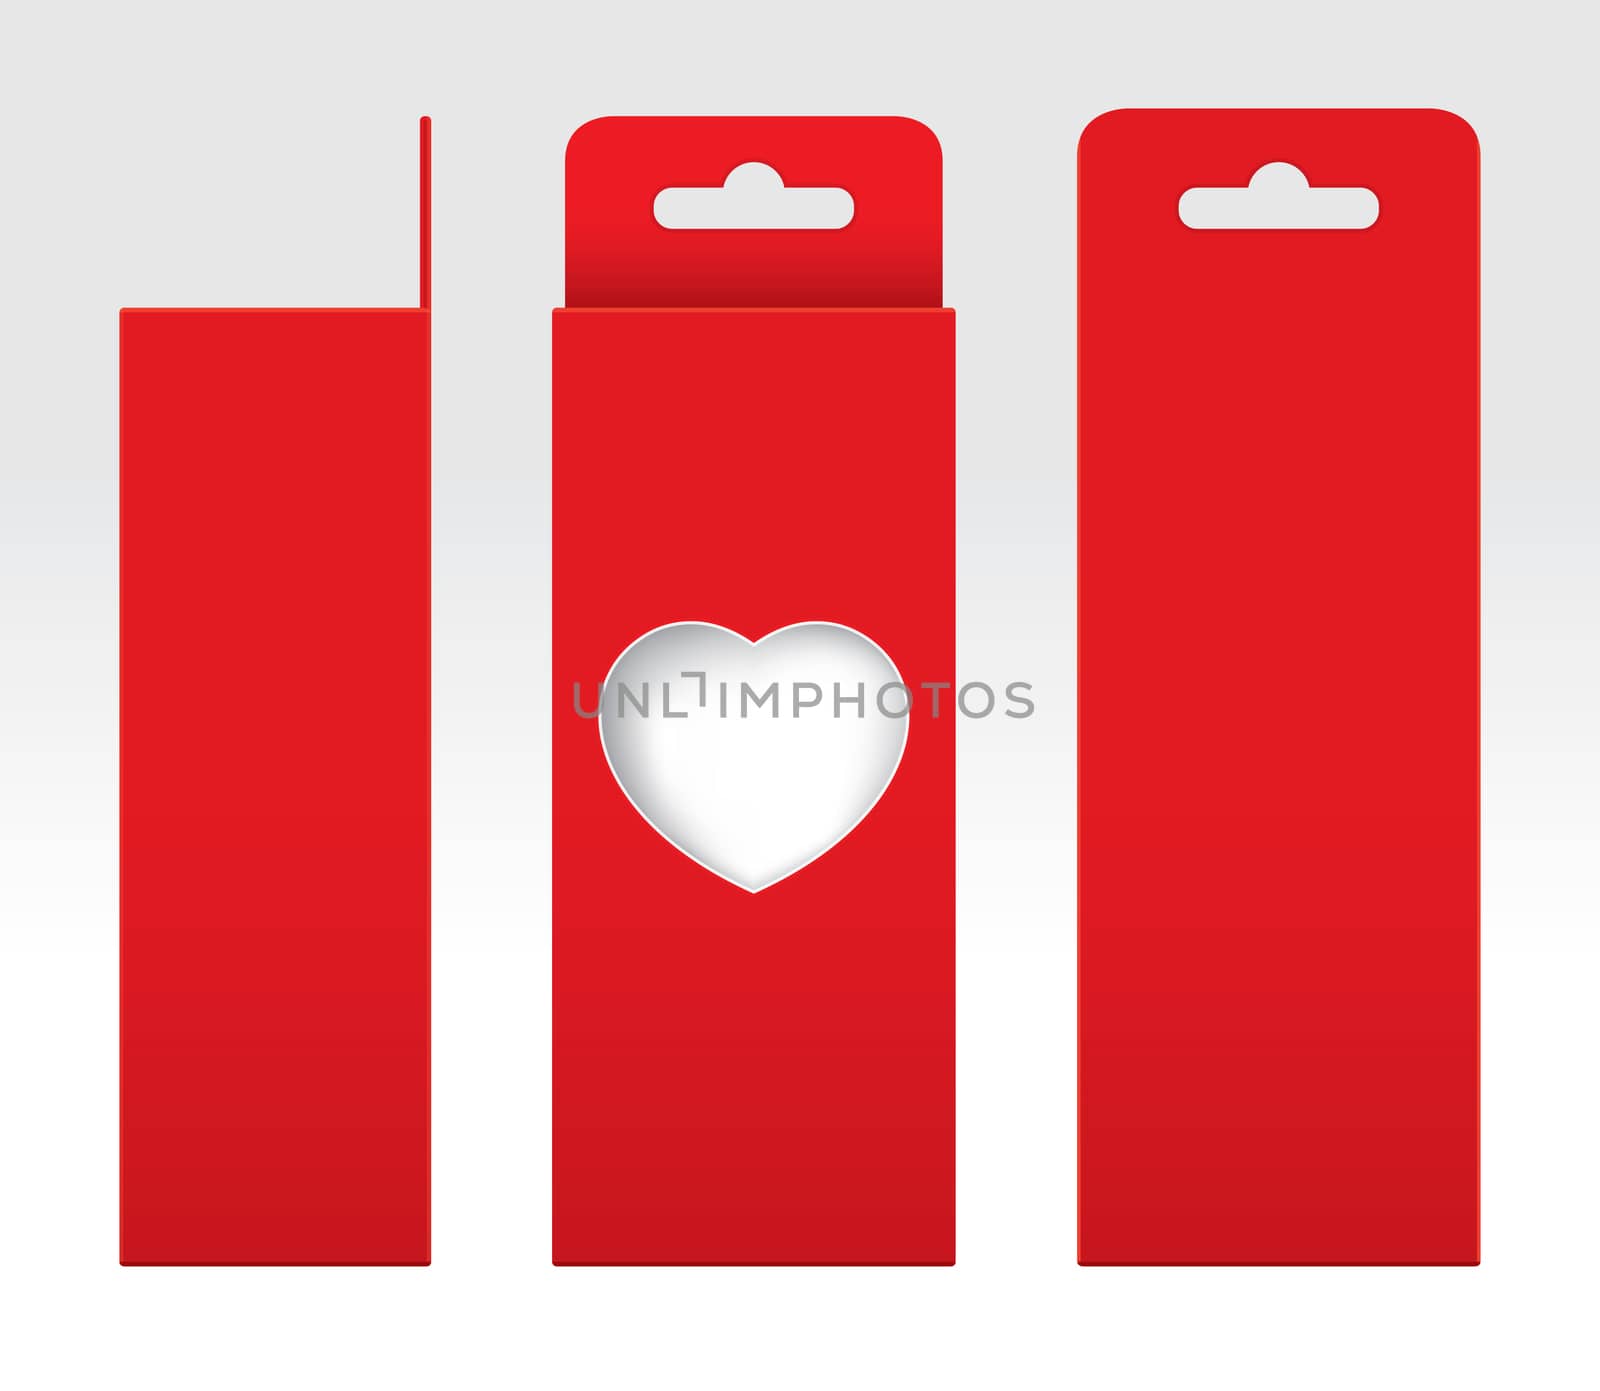 Hanging Red Box window heart-shaped cut out Packaging Template blank, Empty Box red Cardboard, Gift Boxes red kraft Package Carton by cgdeaw